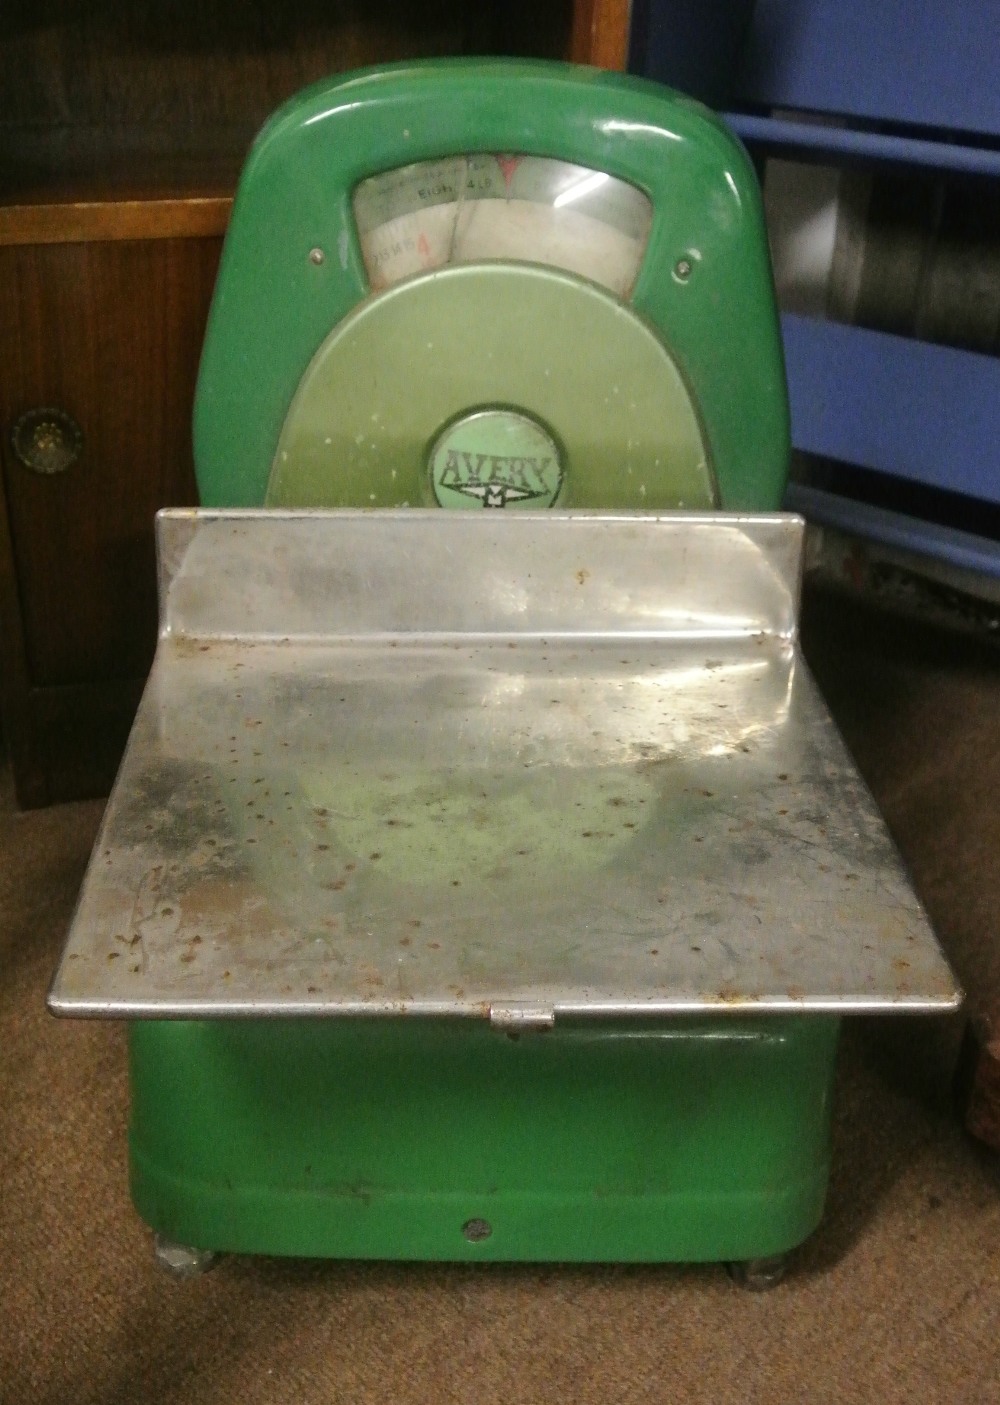 INDUSTRIAL/ HOME - A vintage set of Avery brand shop scales, made to weigh items up to 4lbs. No 1103